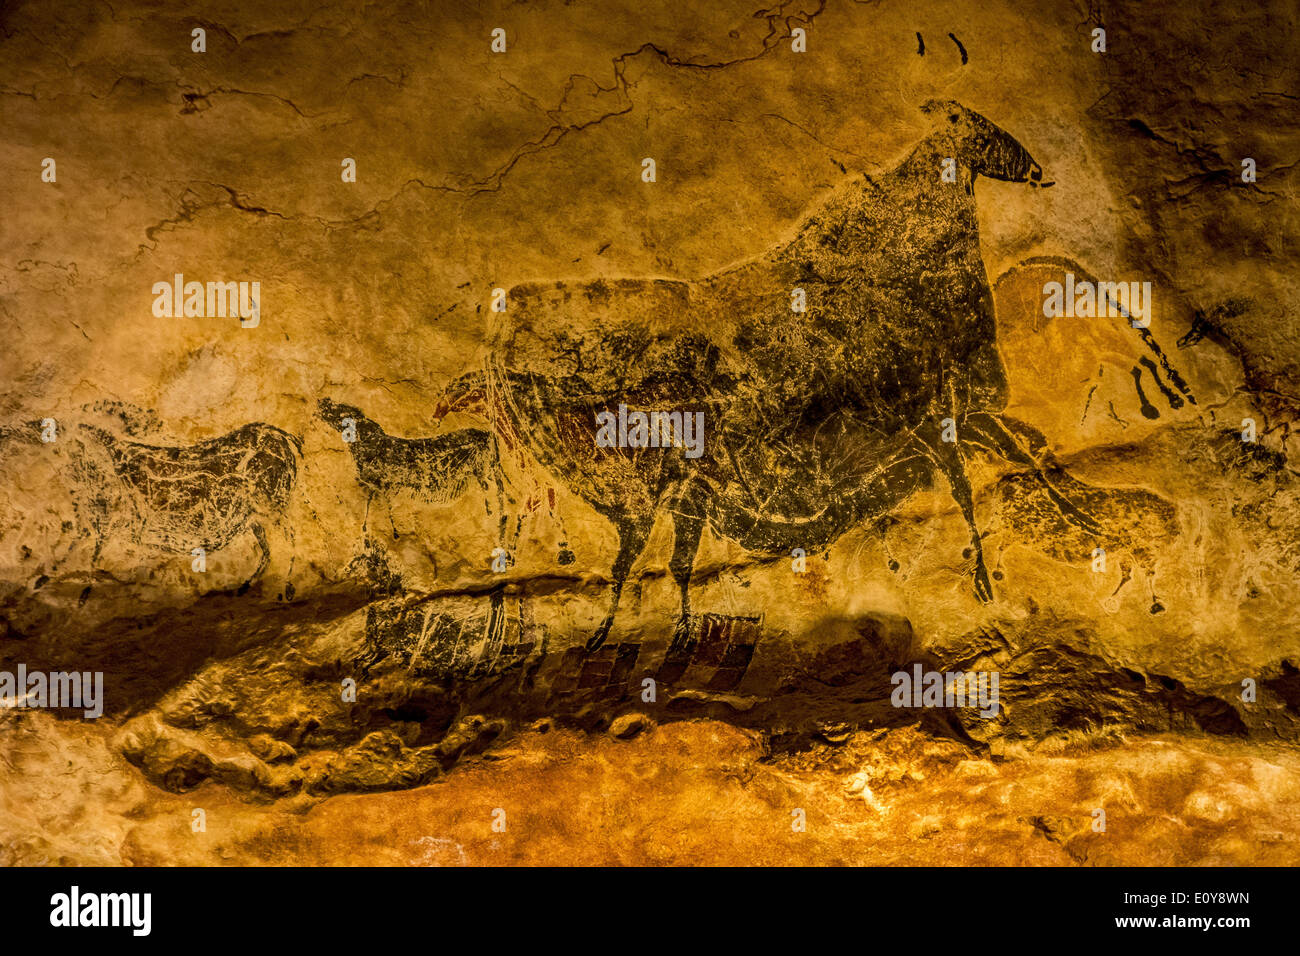 Replica of the Lascaux cave showing prehistoric animals like aurochs and wild horses, Dordogne, France Stock Photo